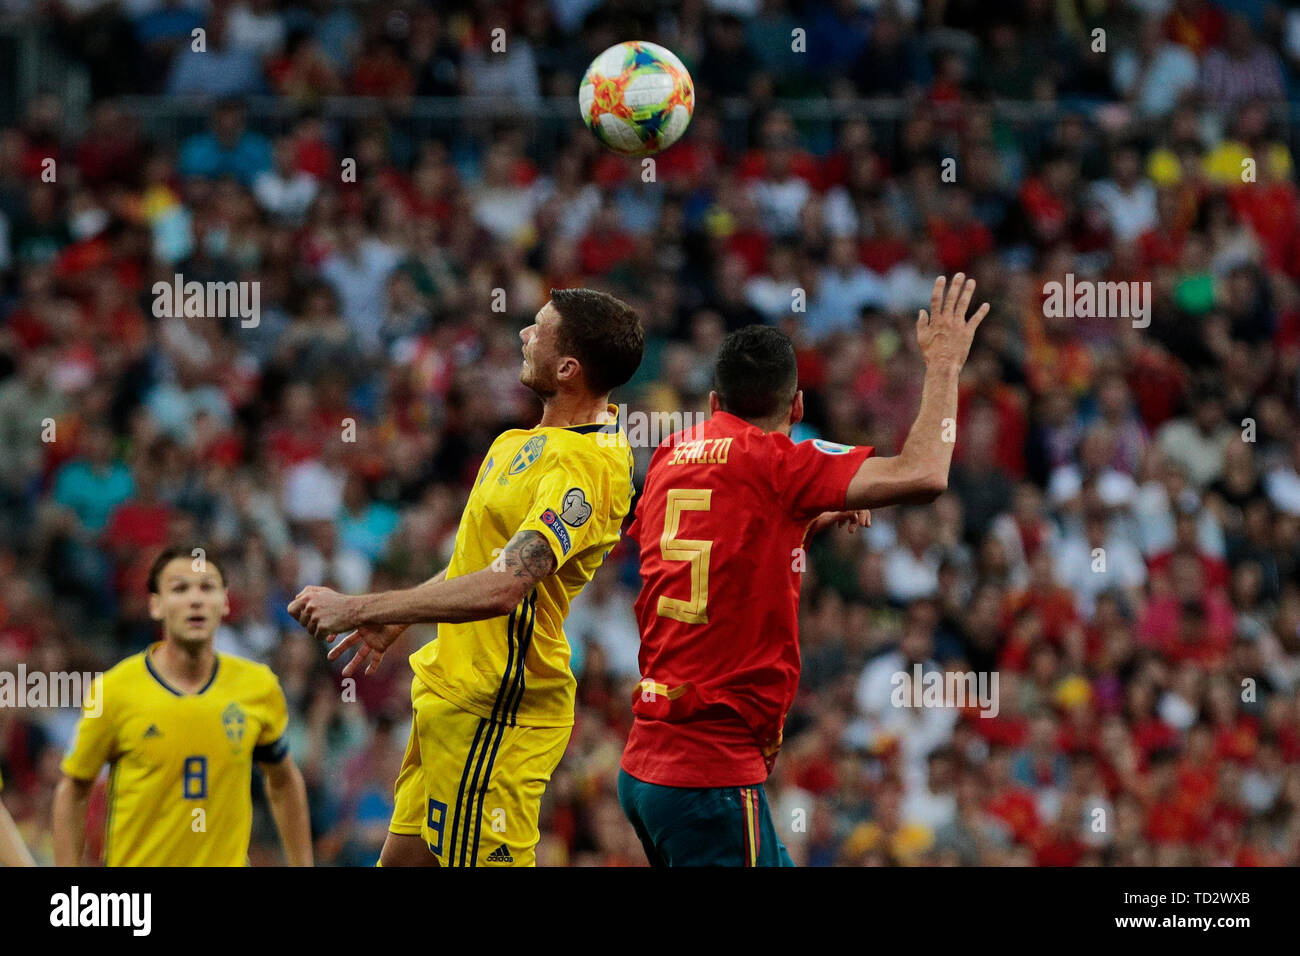 Spain national team player Sergio Busquets and Sweden national team player Marcus Berg seen in action during the UEFA EURO 2020 Qualifier match between Spain and Sweden at Santiago Bernabeu Stadium in Madrid. Final score: Spain 3 - Sweden 0 Stock Photo